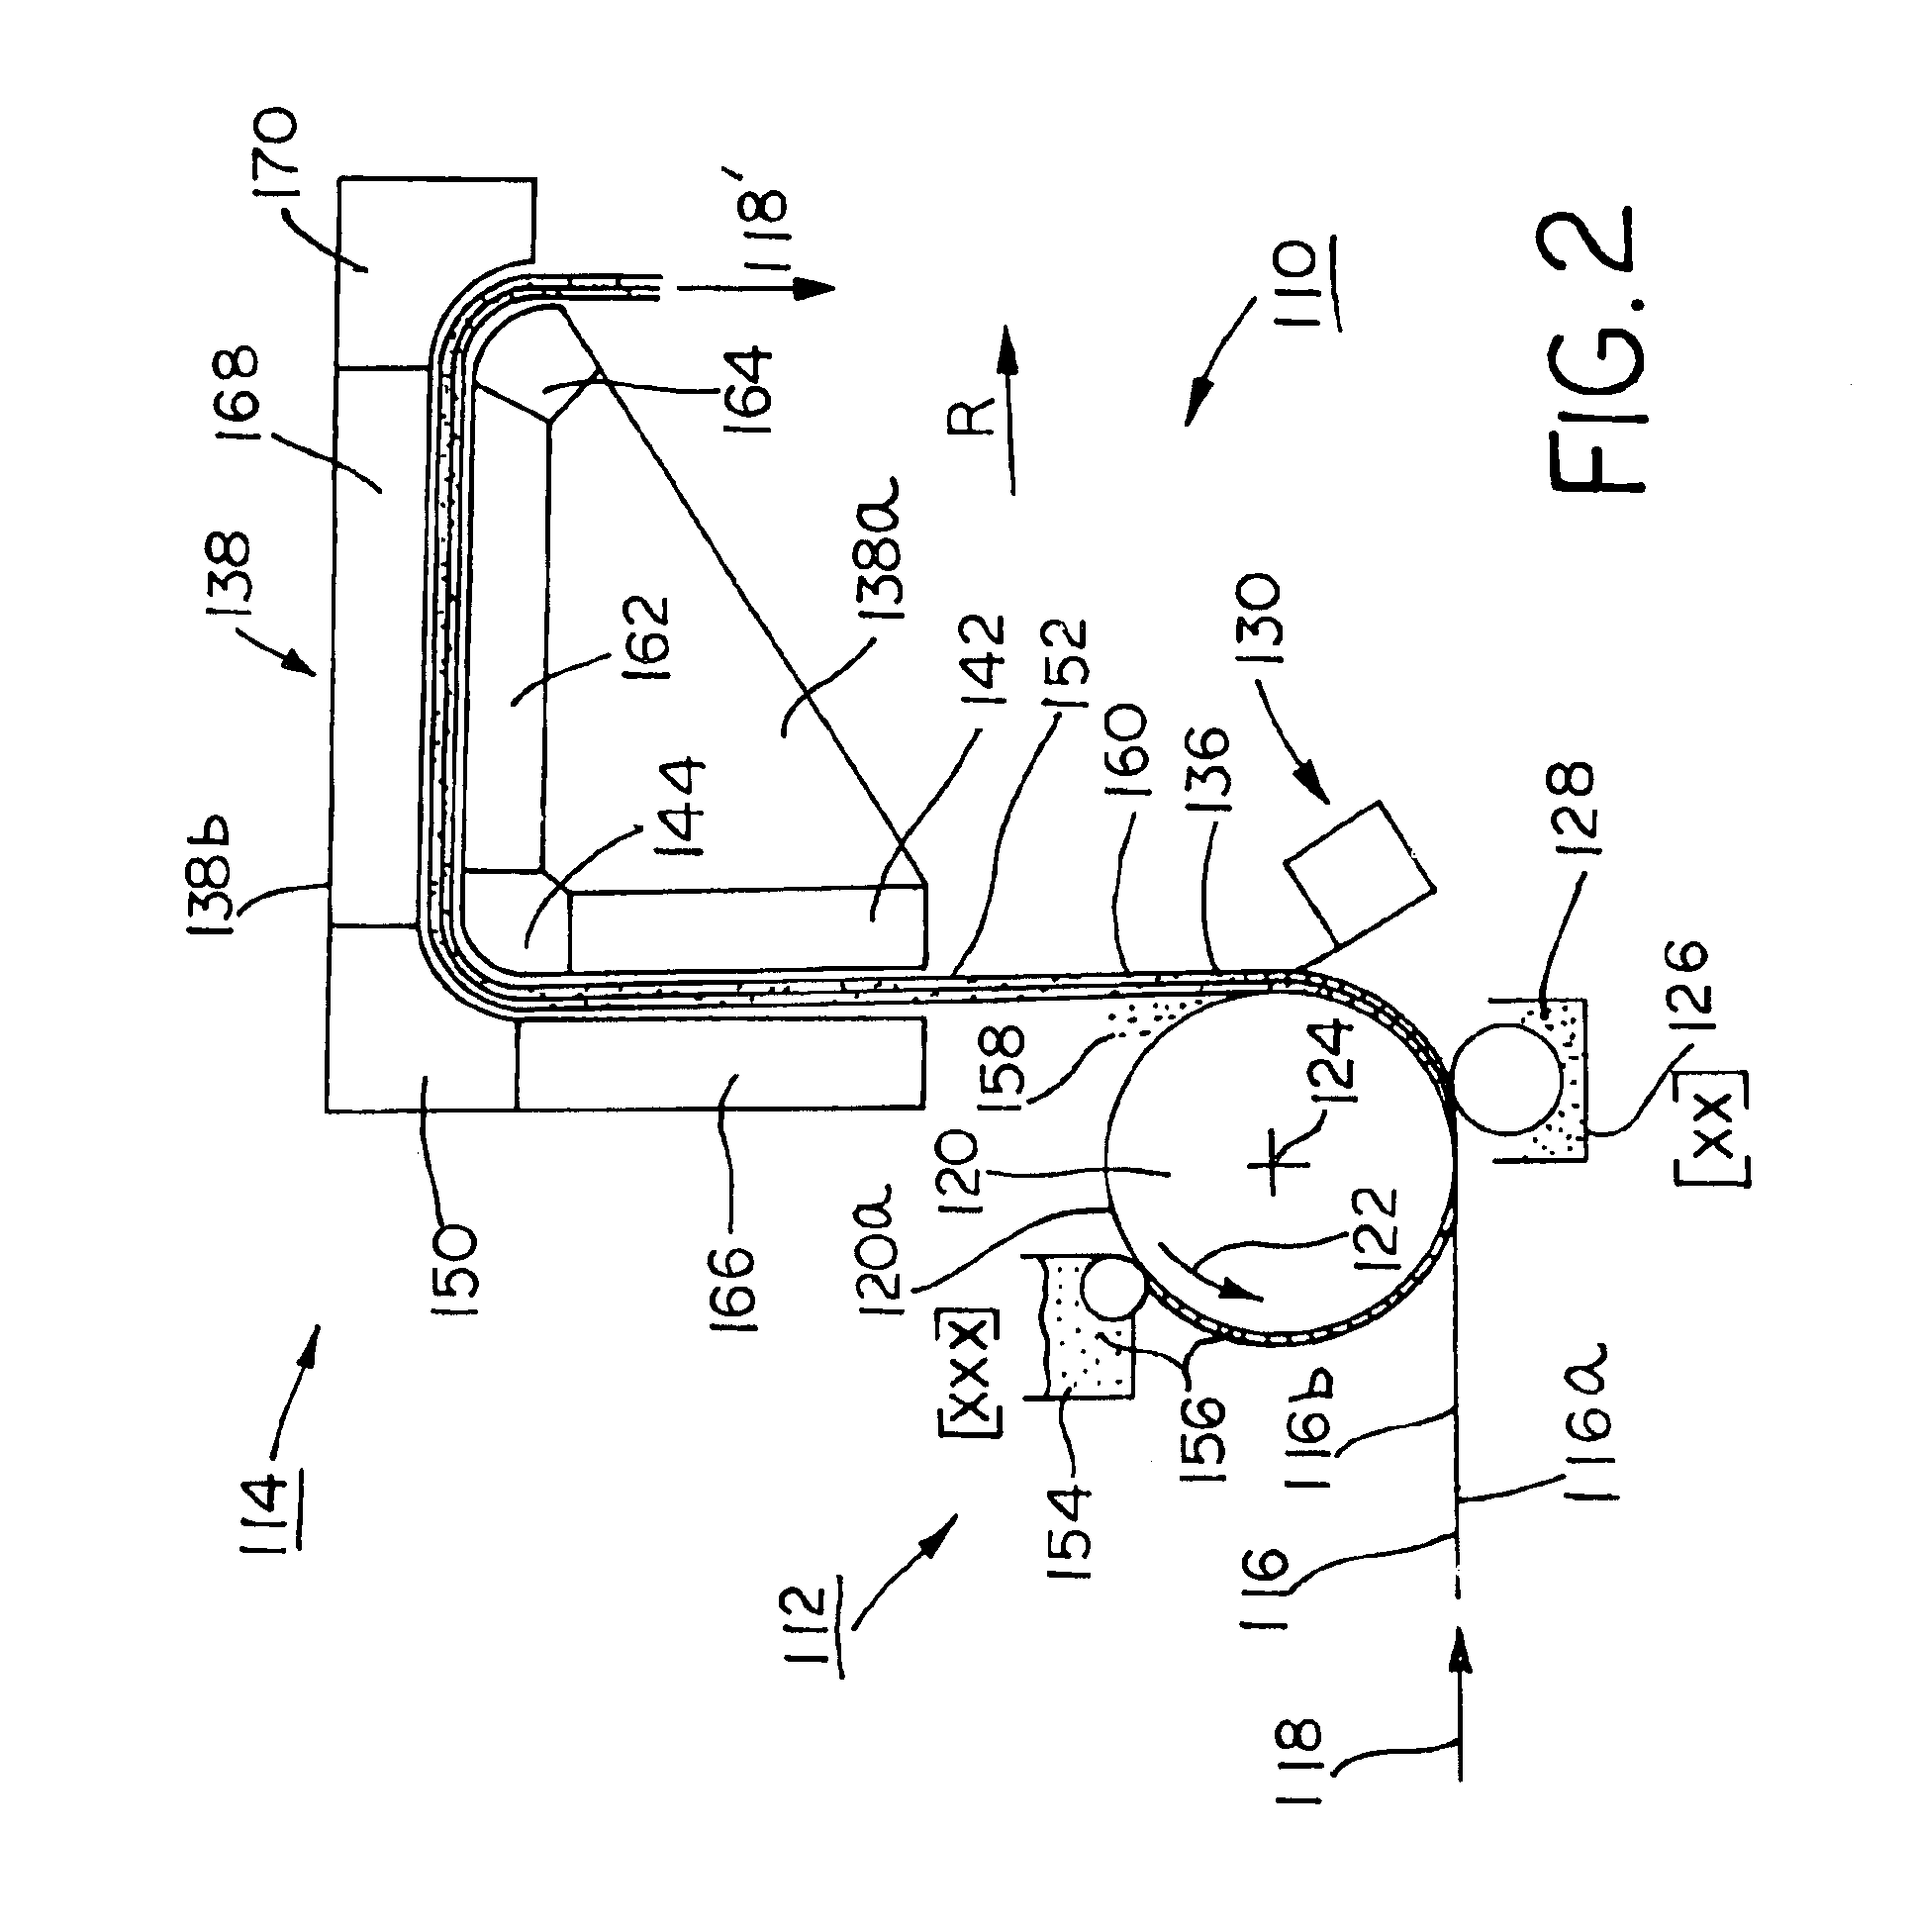 Apparatus for coating moving fiber webs